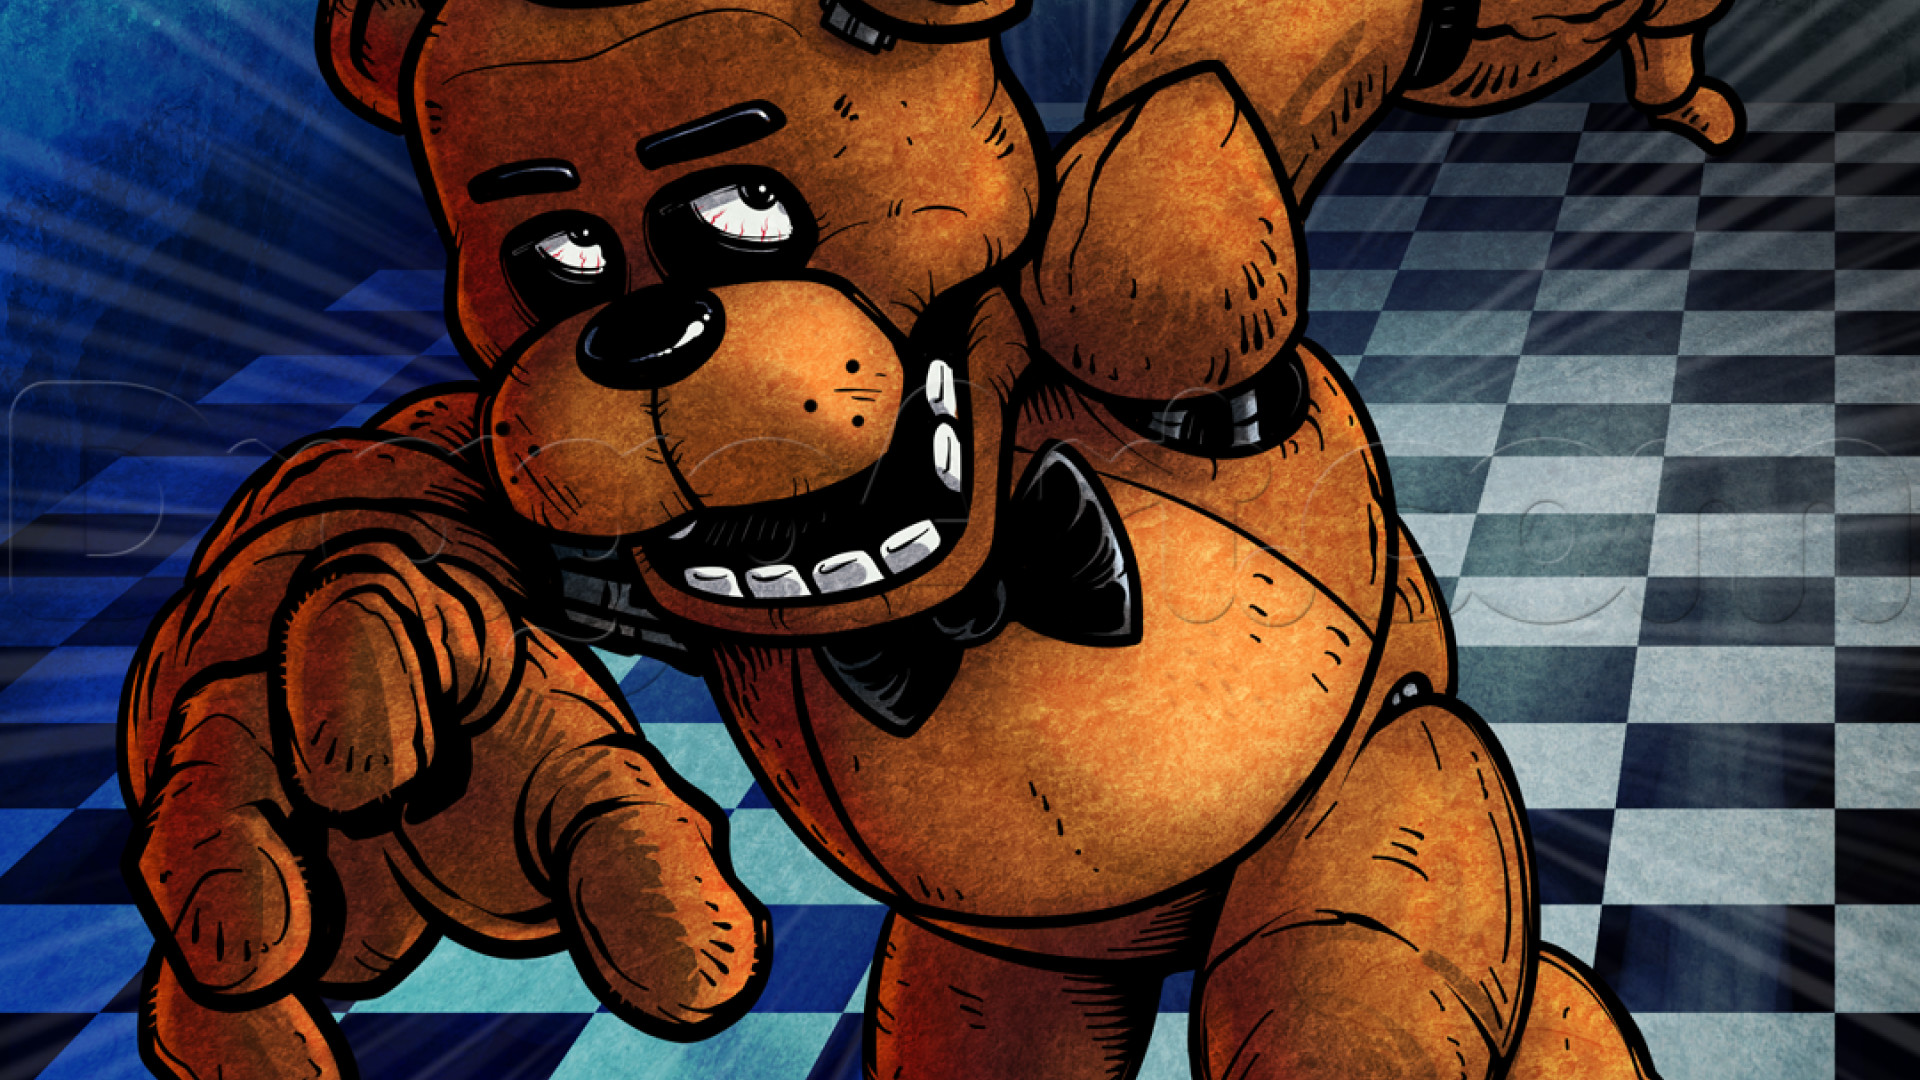 1920x1080 Five nights at video games animals stuffed animal freddy fazbear wallpaper  the best high quality free download.